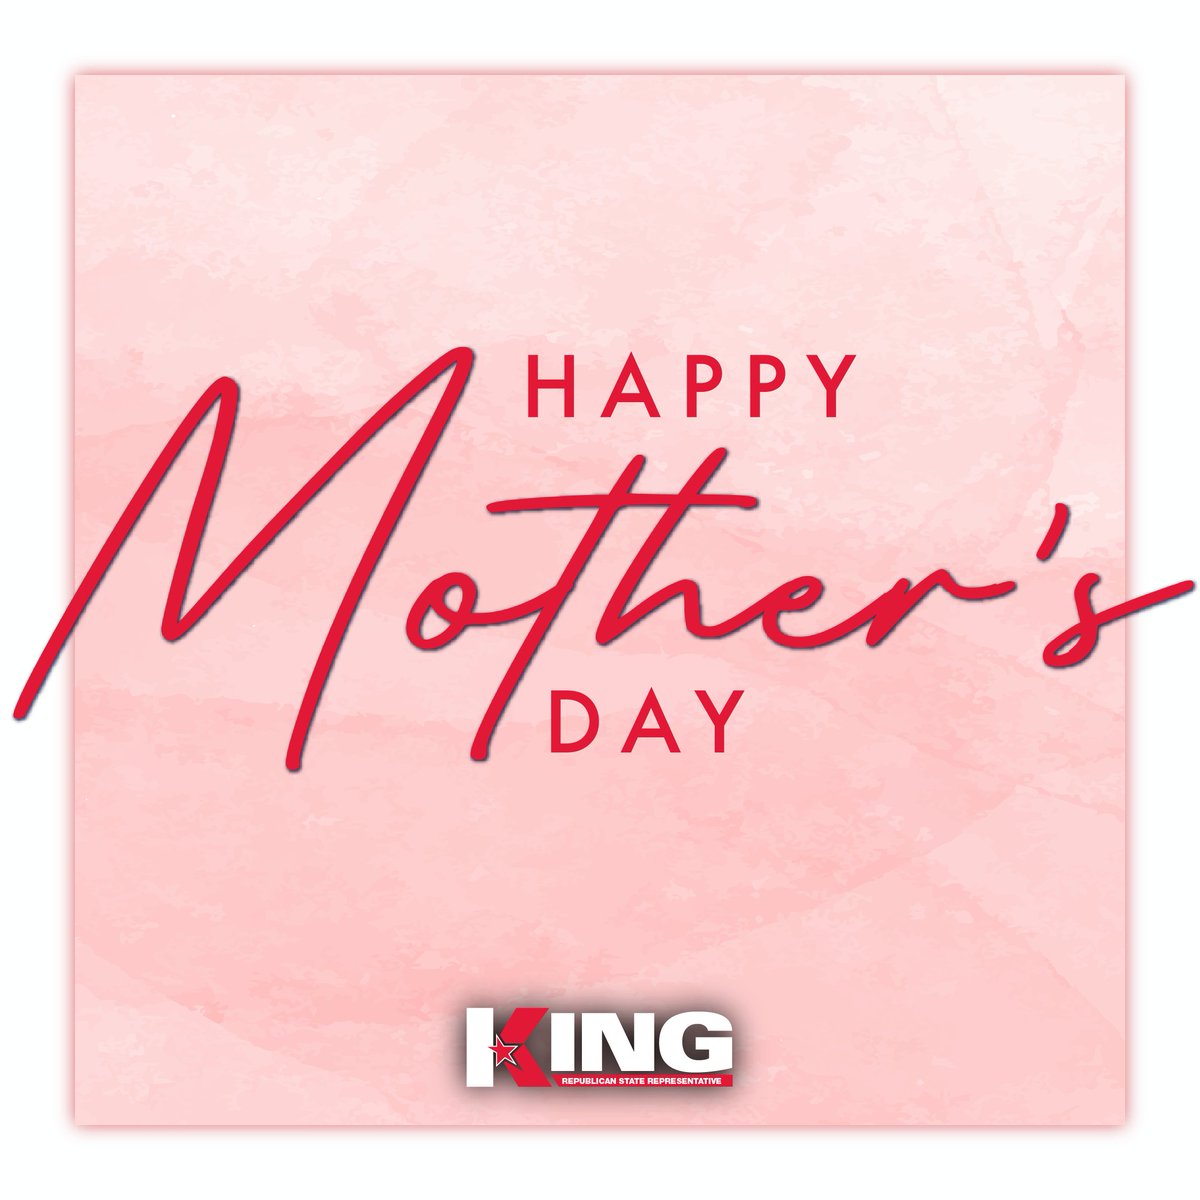 Raising little ones is no easy task. The hard work that goes into keeping a family running & helping children grow up well deserves recognition. Today I want to wish all our wonderful moms a very Happy Mother's Day. I hope your families treat you to some rest & relaxation today!